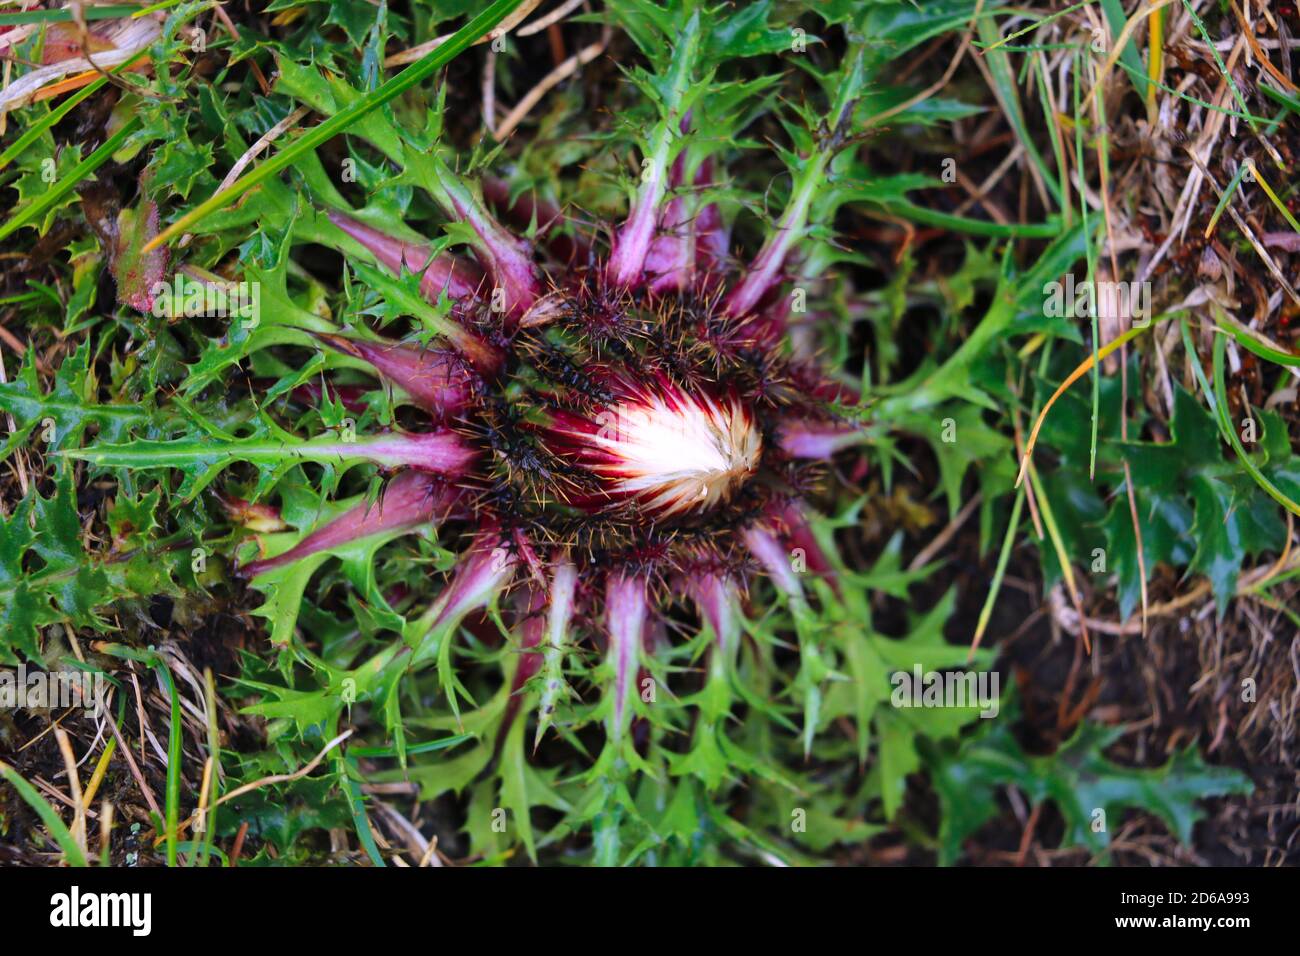 Cirsium vulgare, Spear thistle, Bull thistle, Common thistle, short lived thistle plant with spine tipped winged stems and leaves, pink purple flower heads, selective focus Stock Photo